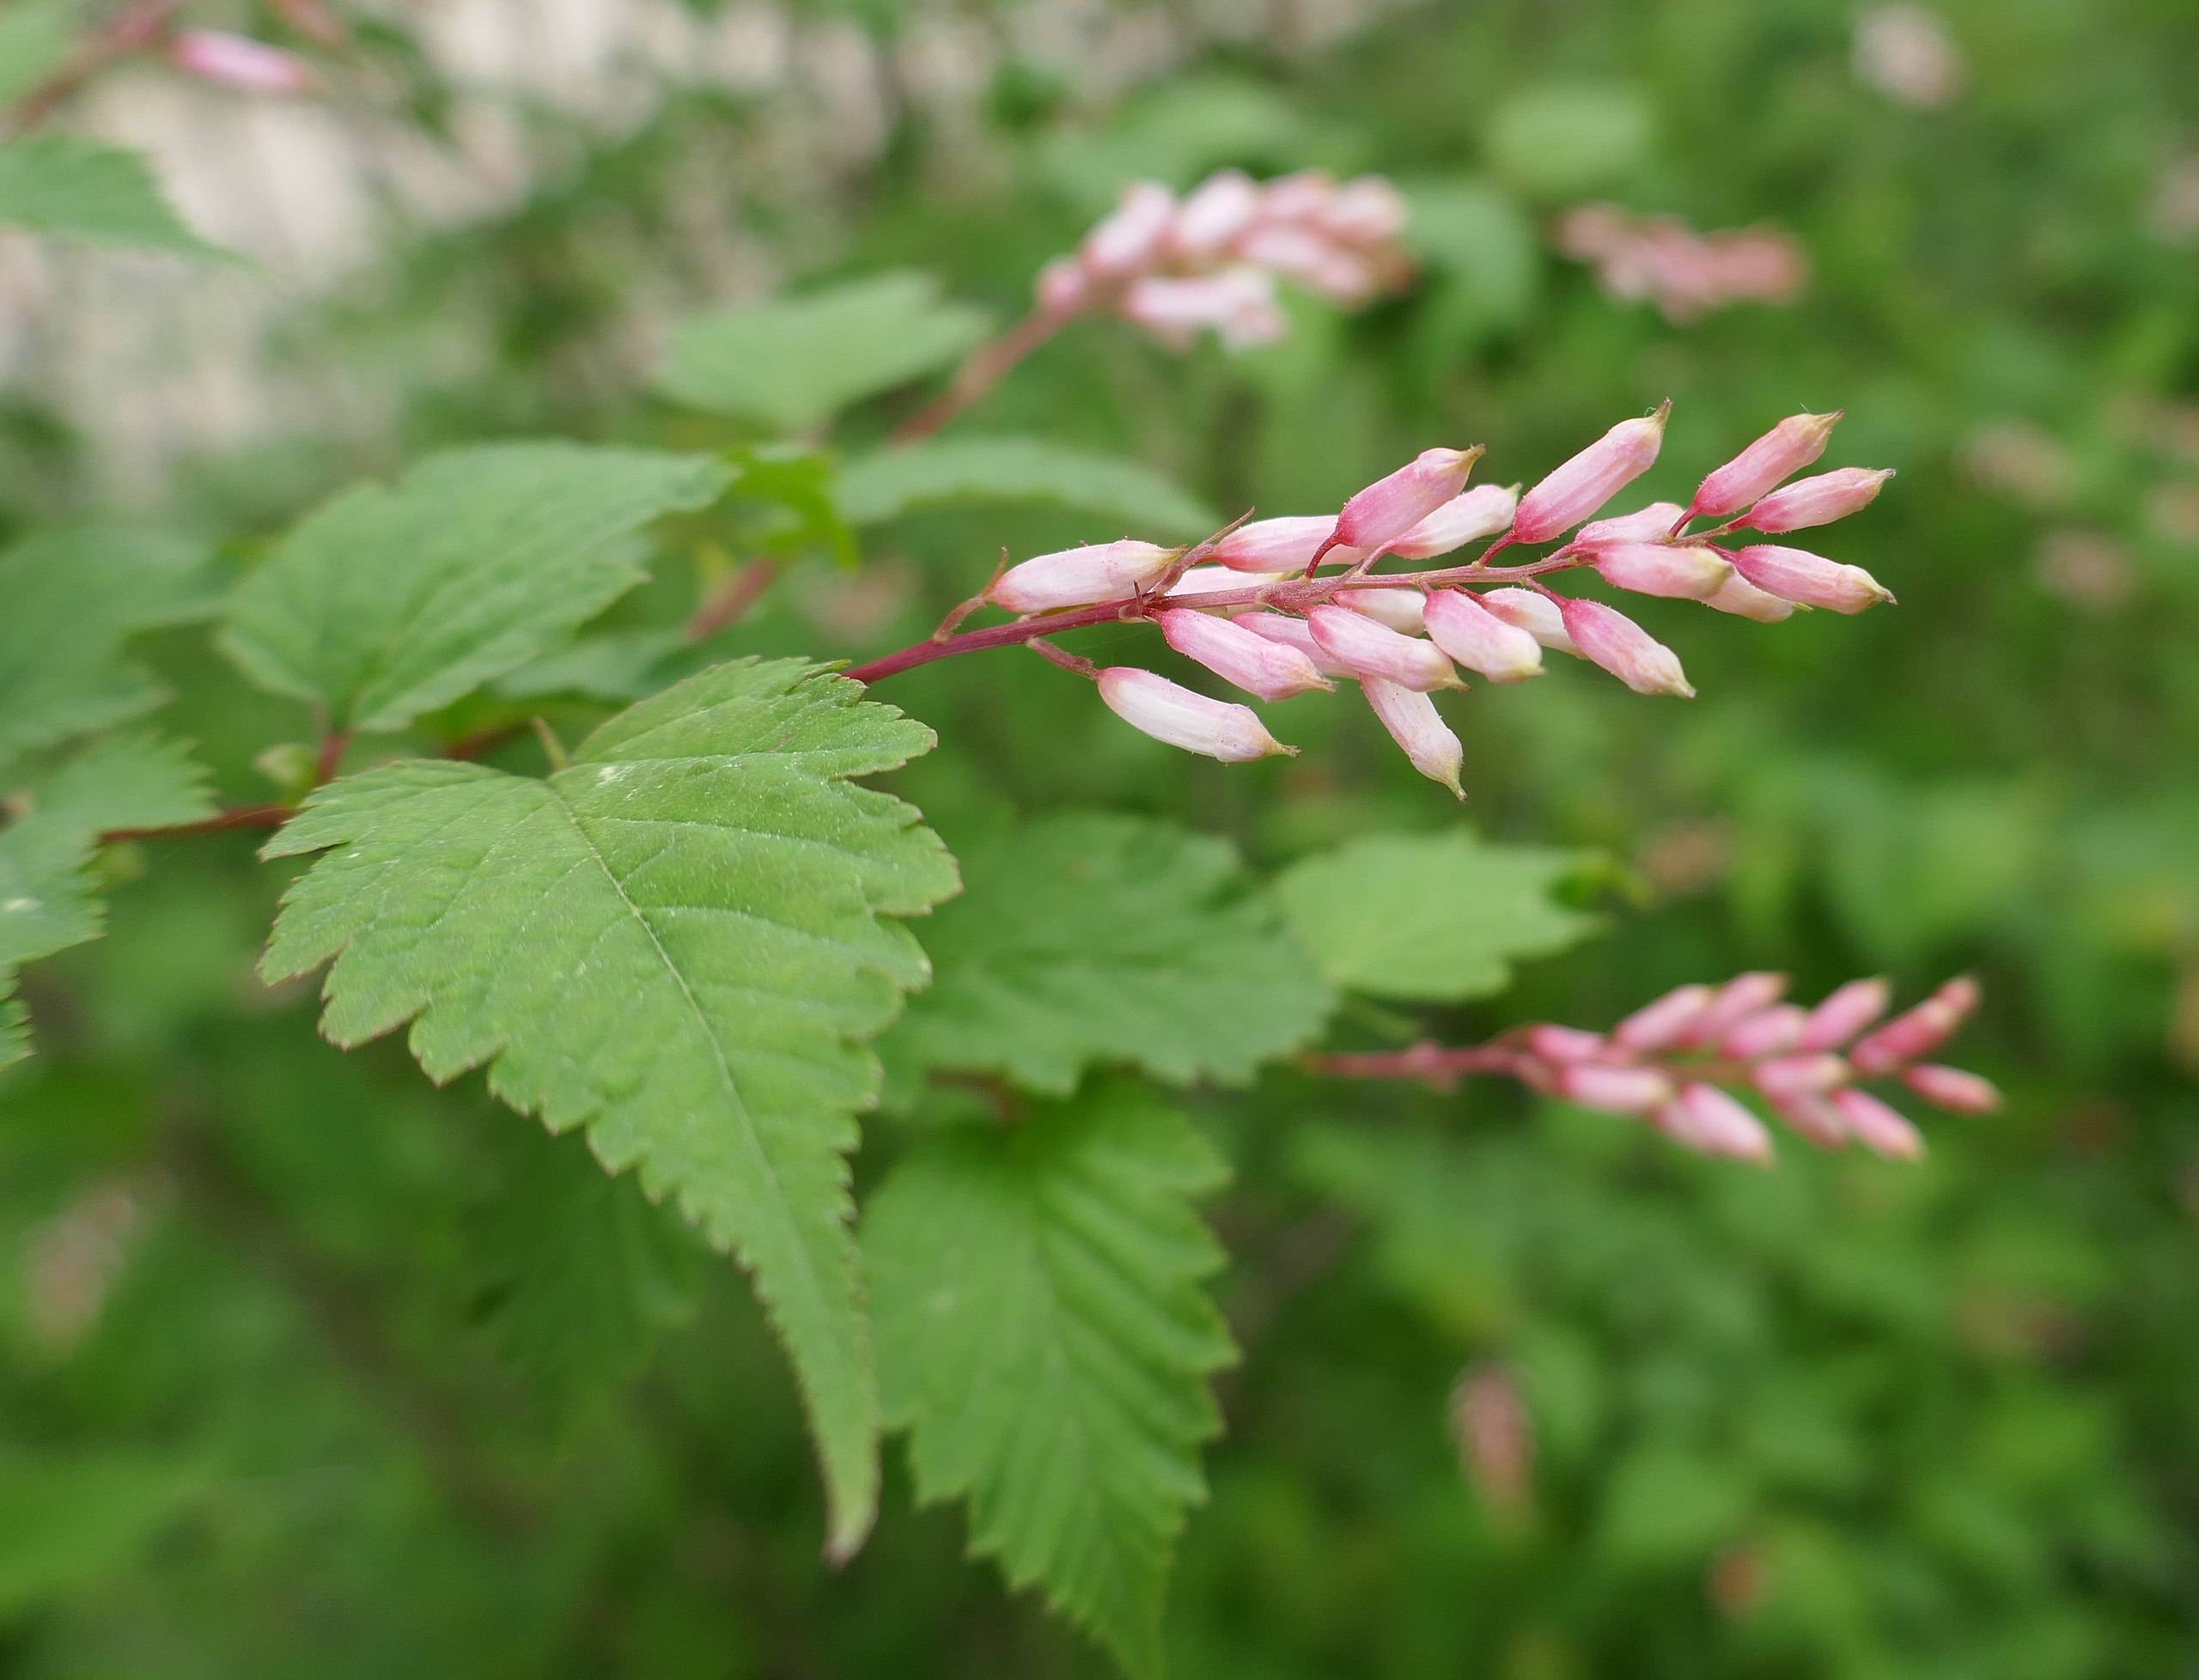 light-pink flowers with green leaves and red stems